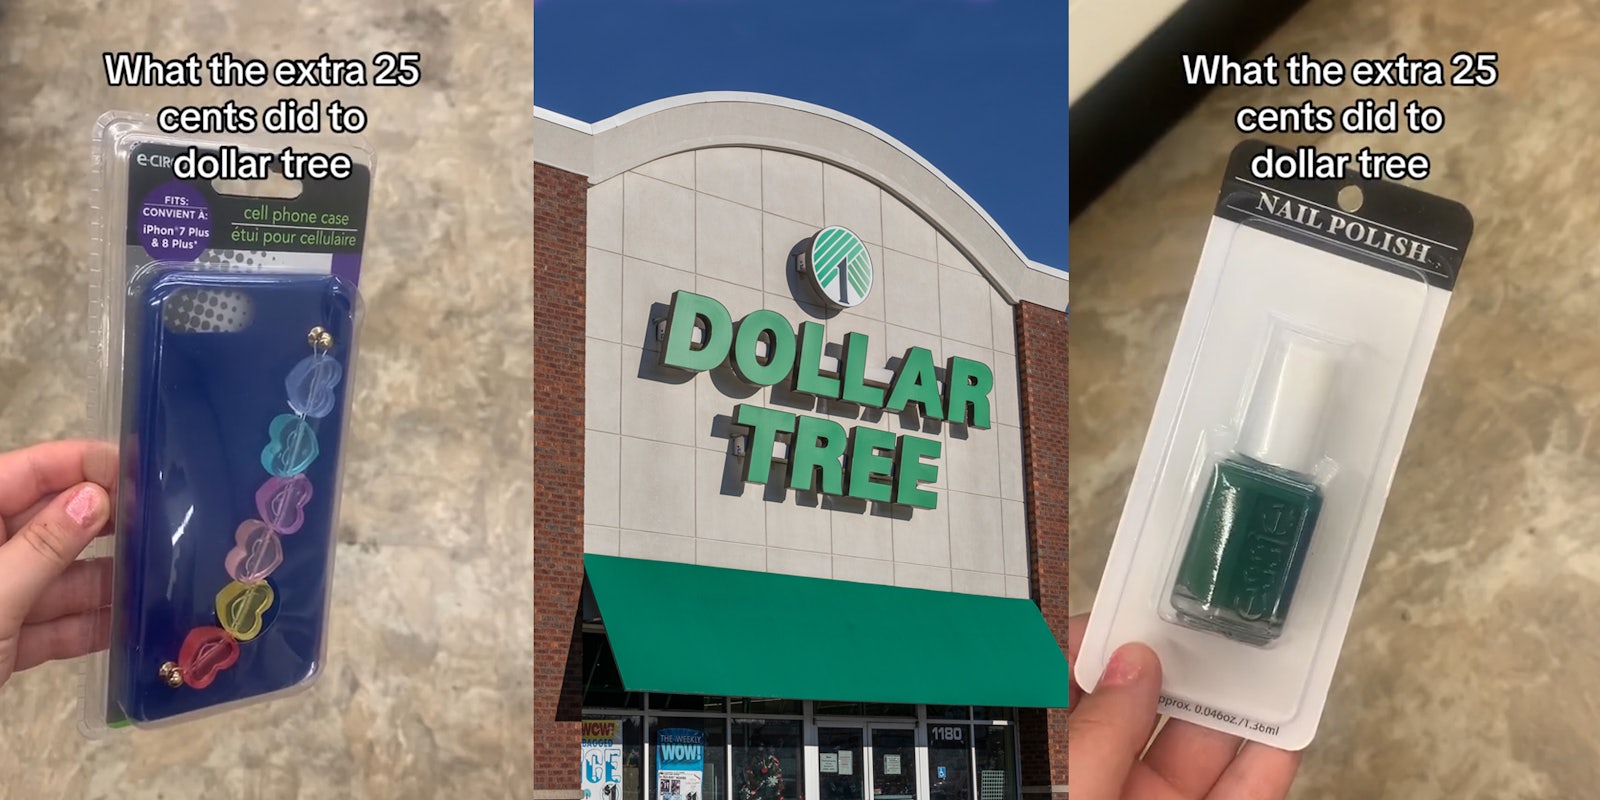 Dollar Tree customer holding phone case with caption 'What the extra 25 cents did to dollar tree' (l) Dollar Tree building with sign (c) Dollar Tree customer holding nail polish with caption 'What the extra 25 cents did to dollar tree' (r)